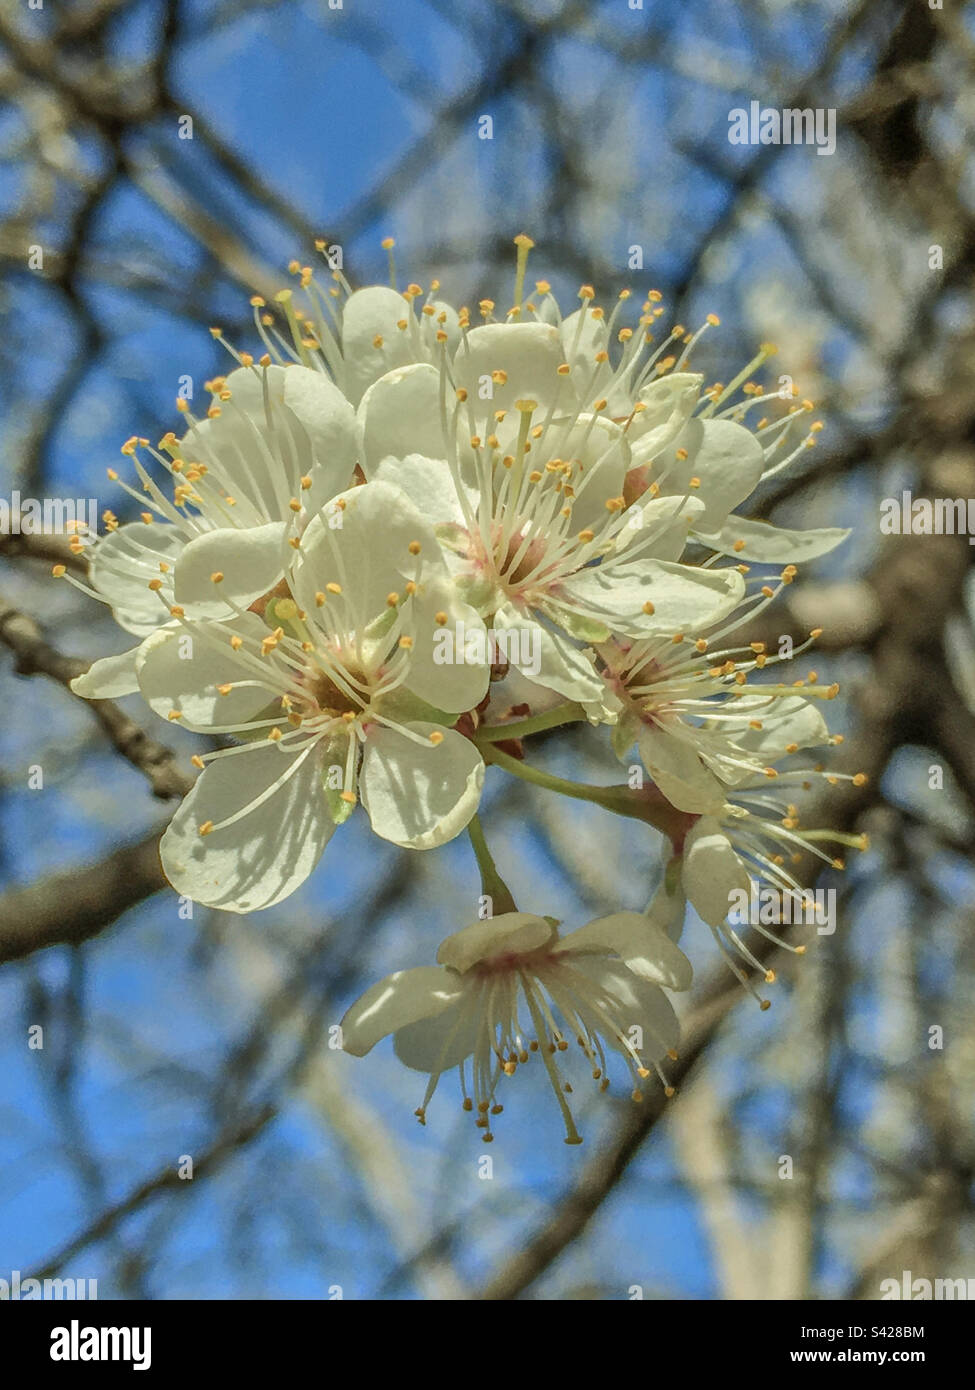 Mexican plum flowers Stock Photo